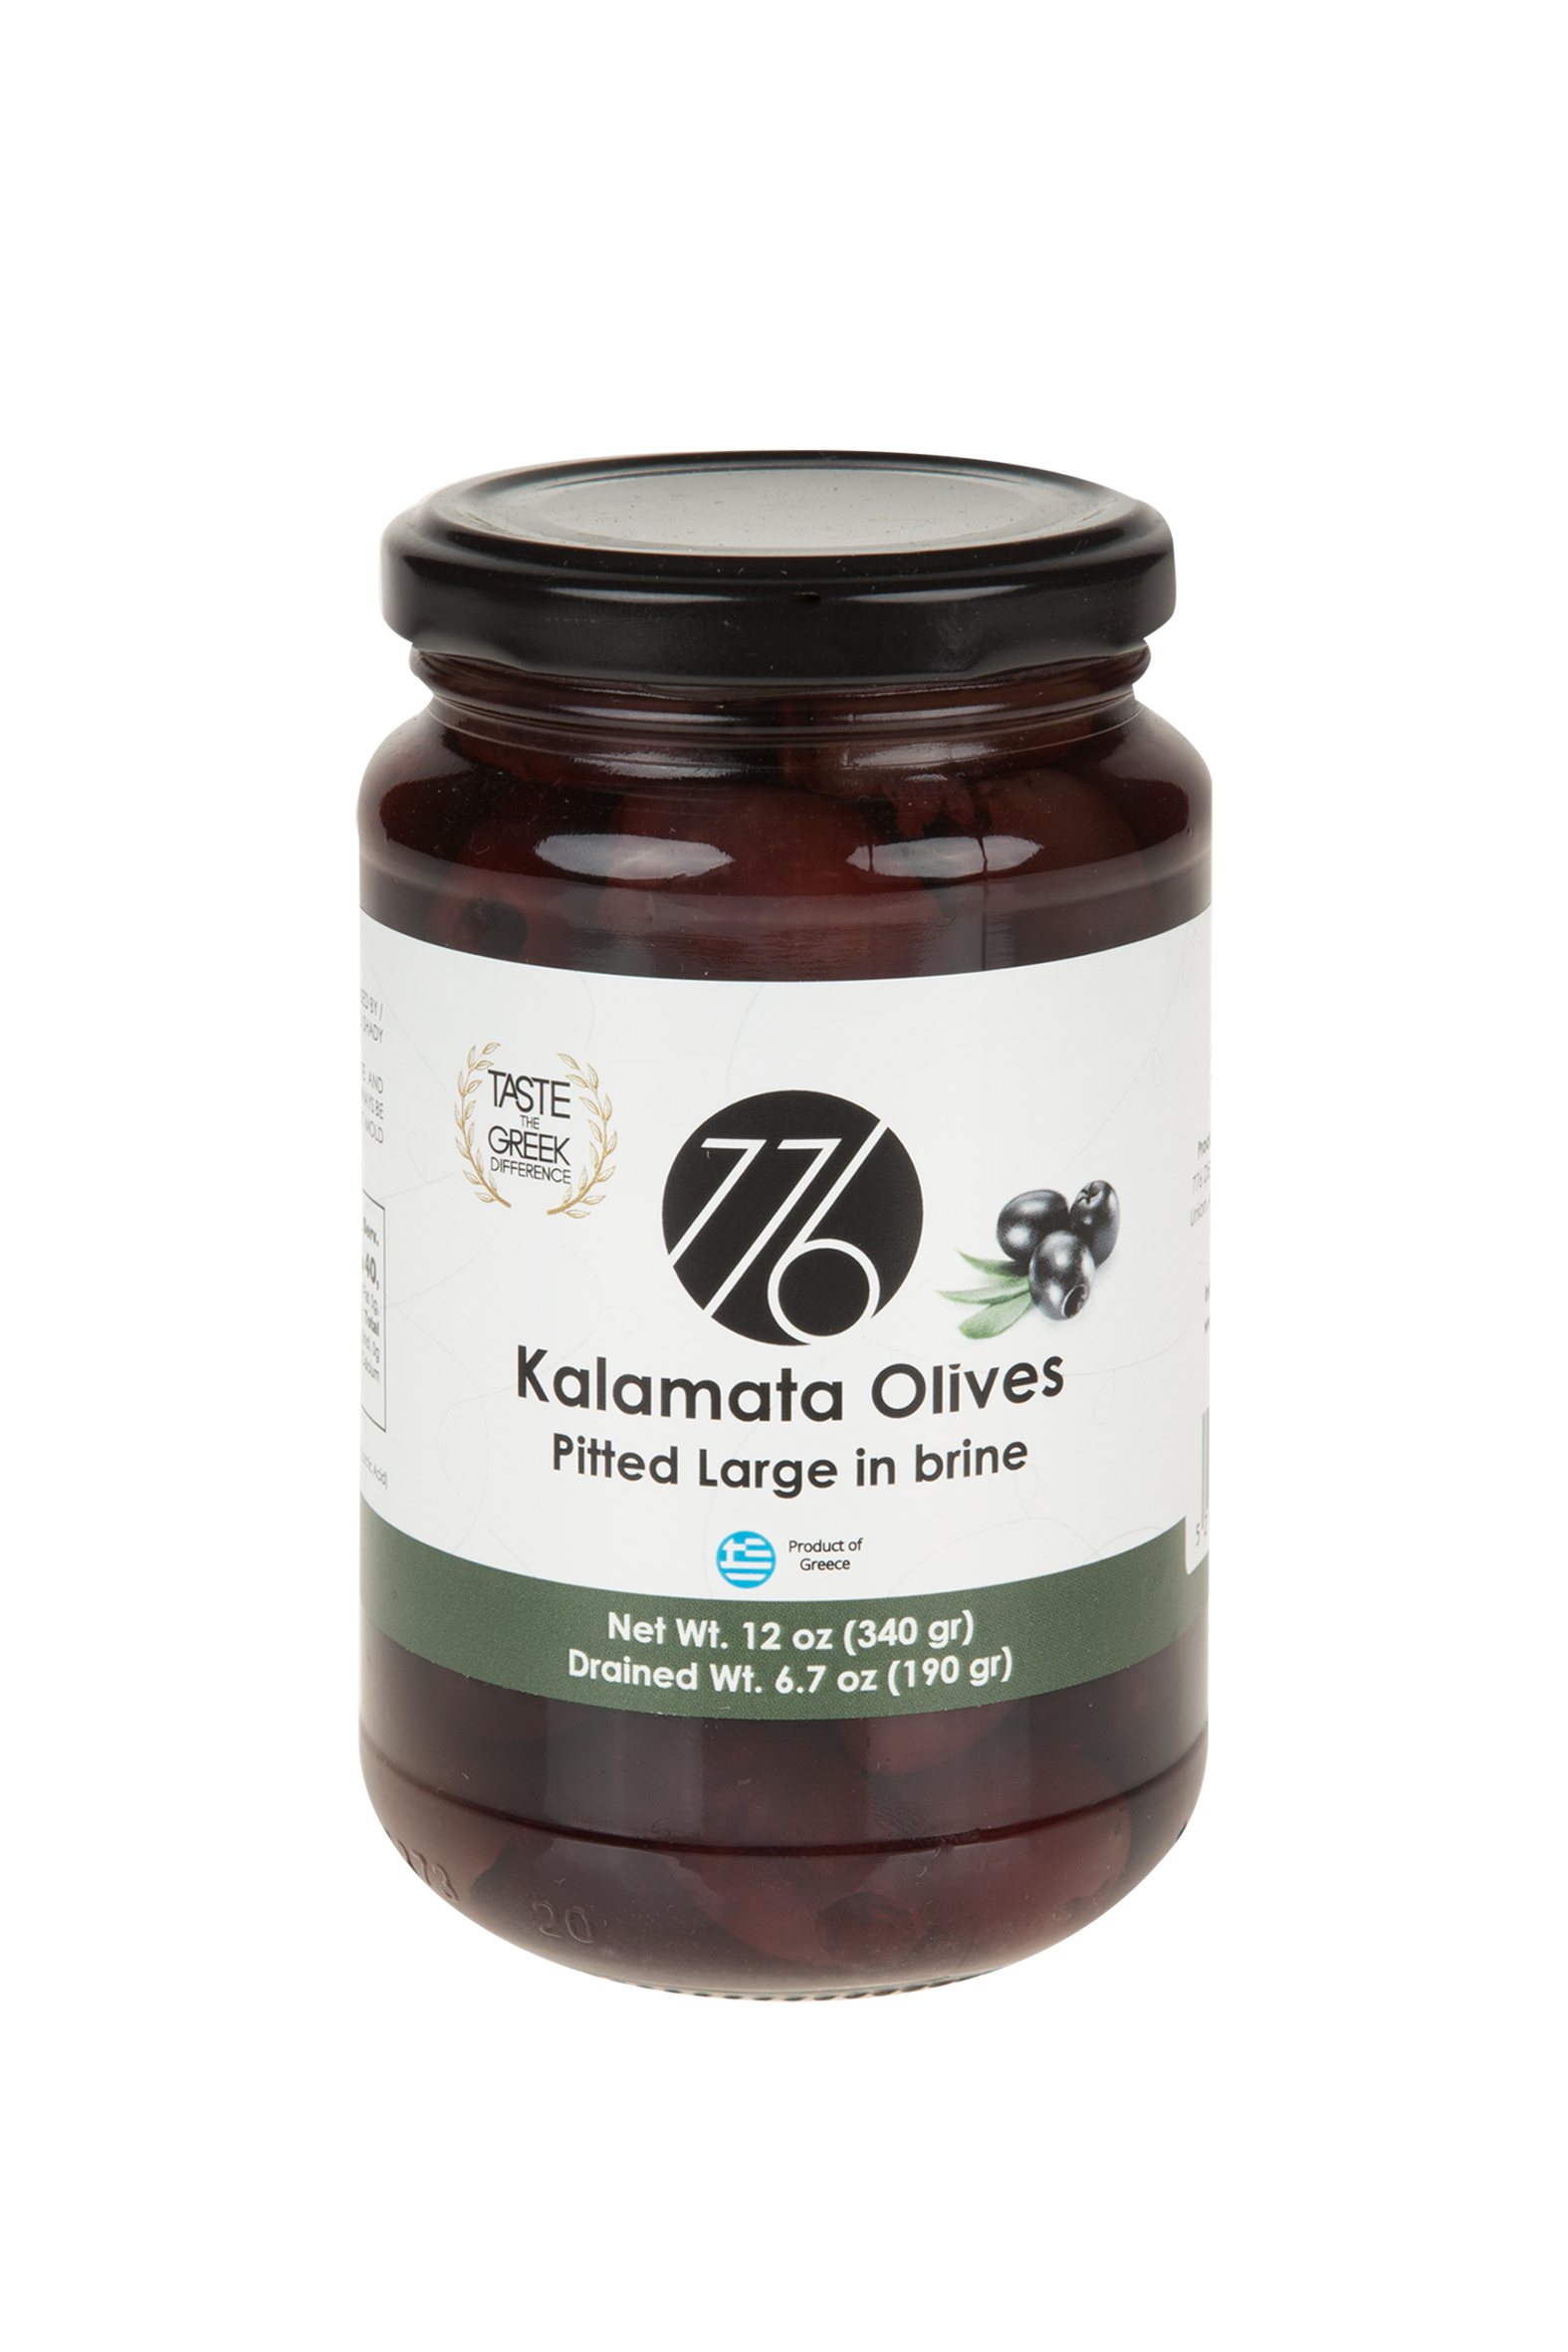 Kalamata Olives Pitted Large in brine